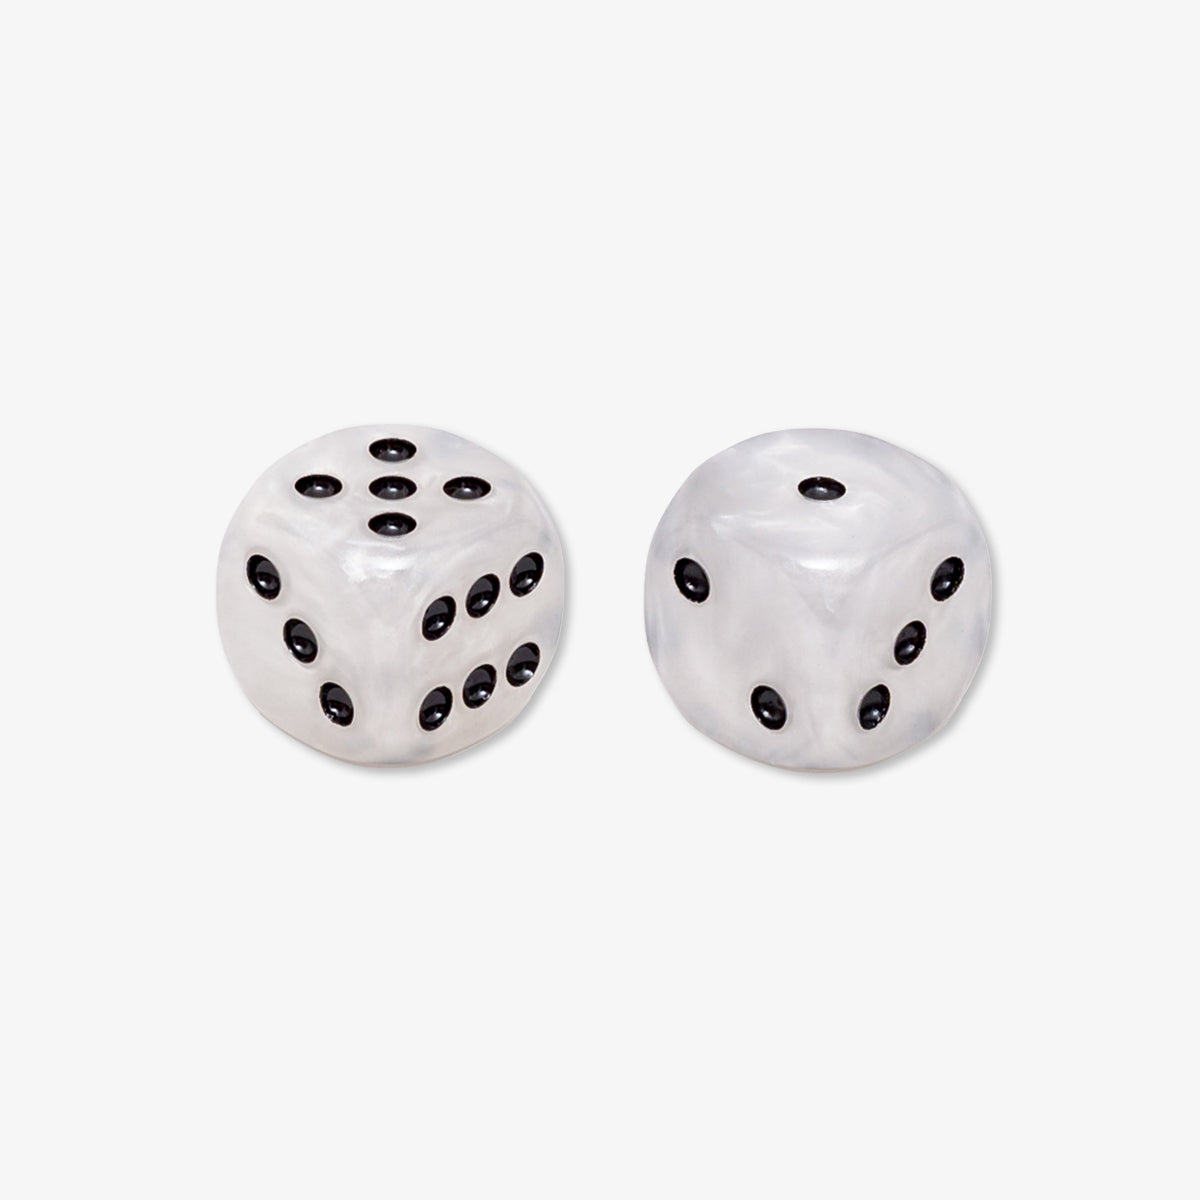 Backgammon Dice Resin Mother-of-Pearl 15 mm White